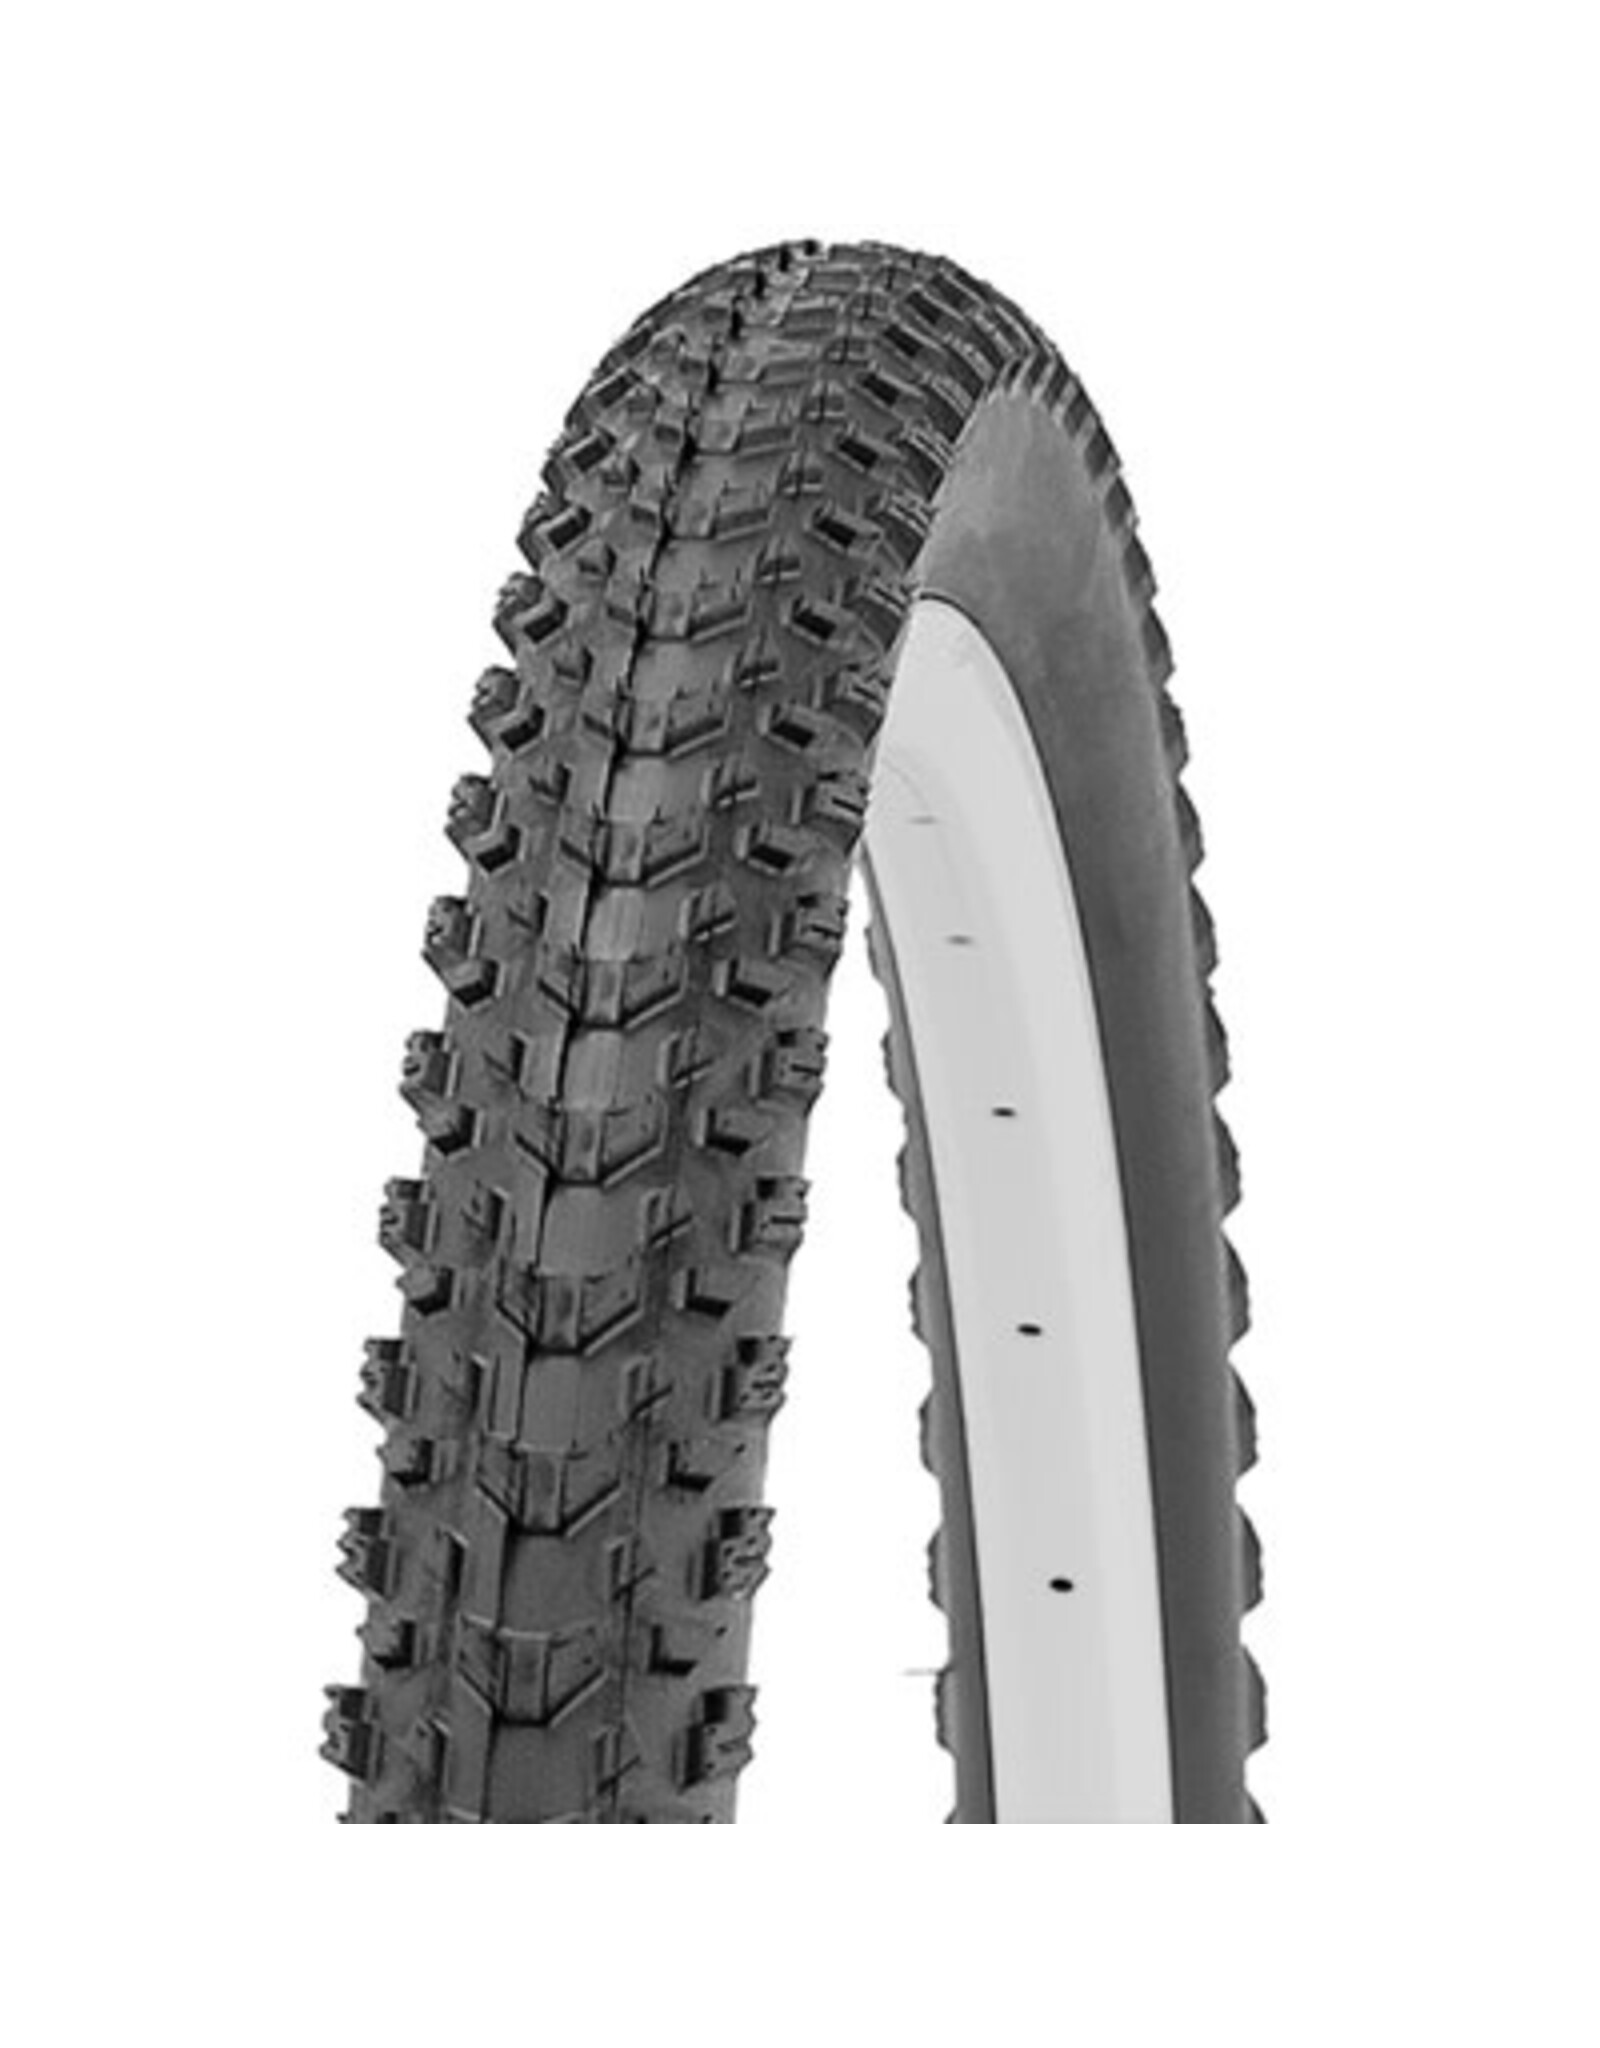 Tire Ultracycle Clawhammer 29x2.35" Black